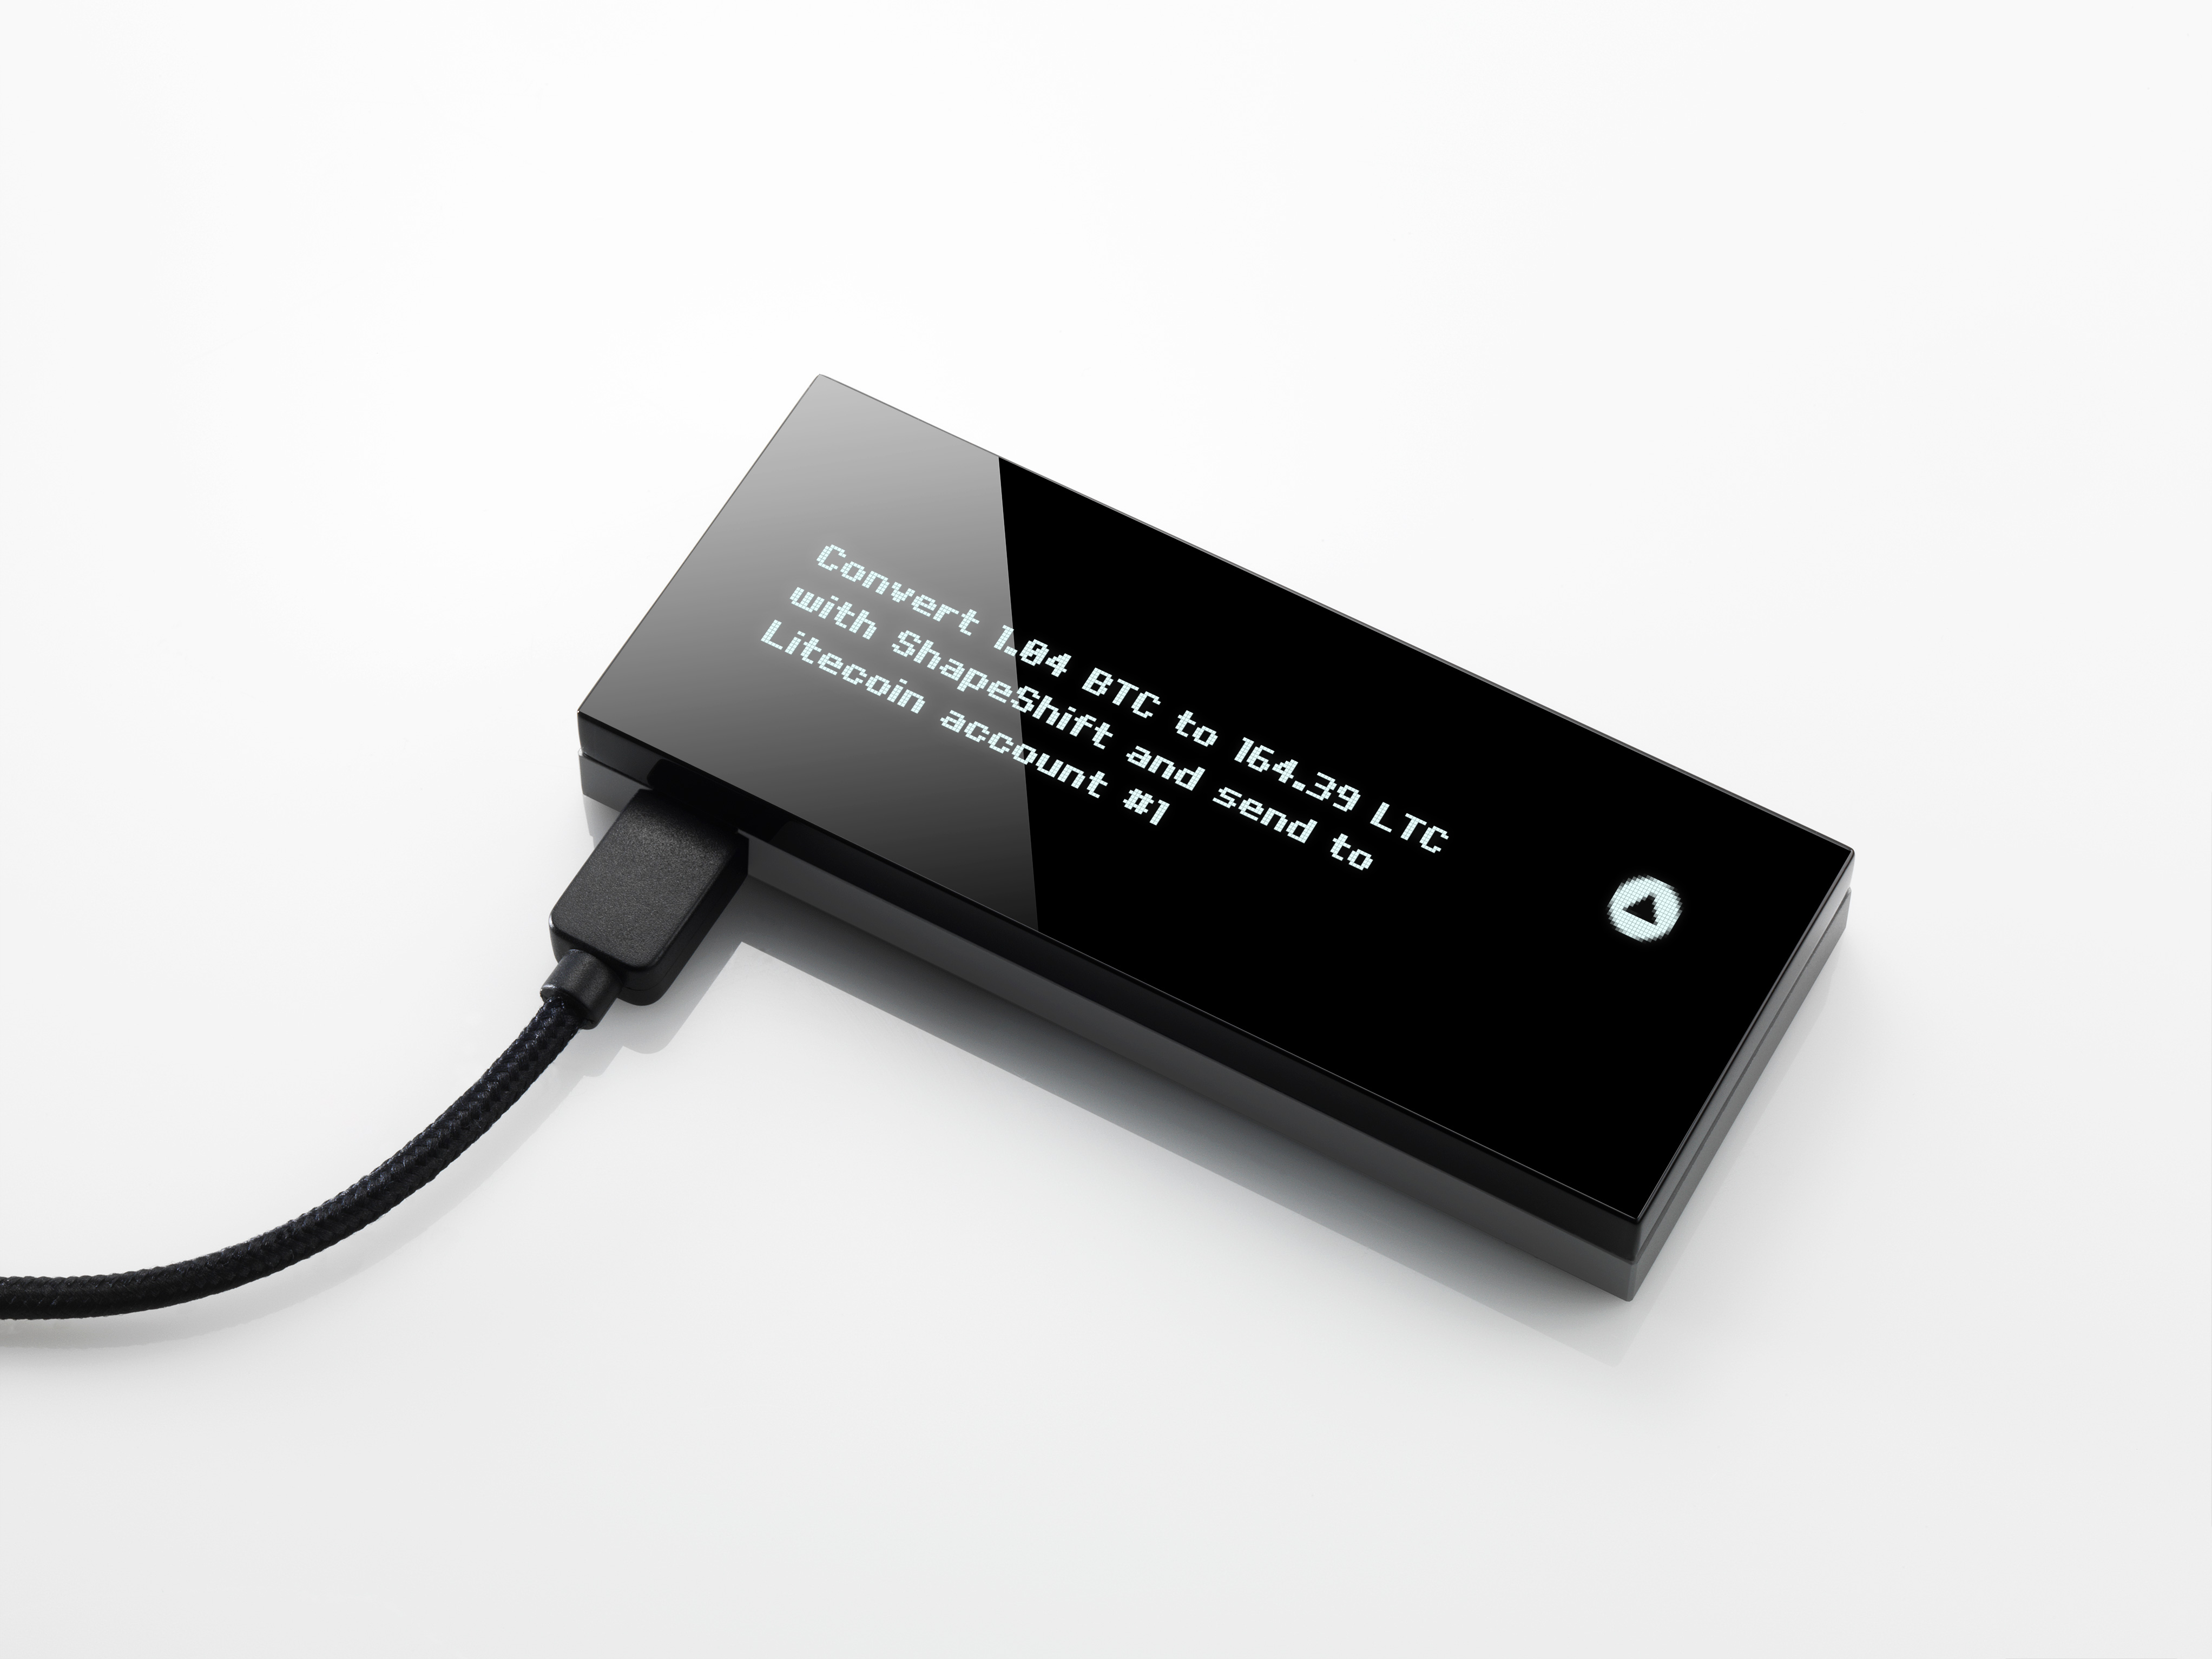 Keepkey The Simple Bitcoin & Altcoin Hardware Wallet